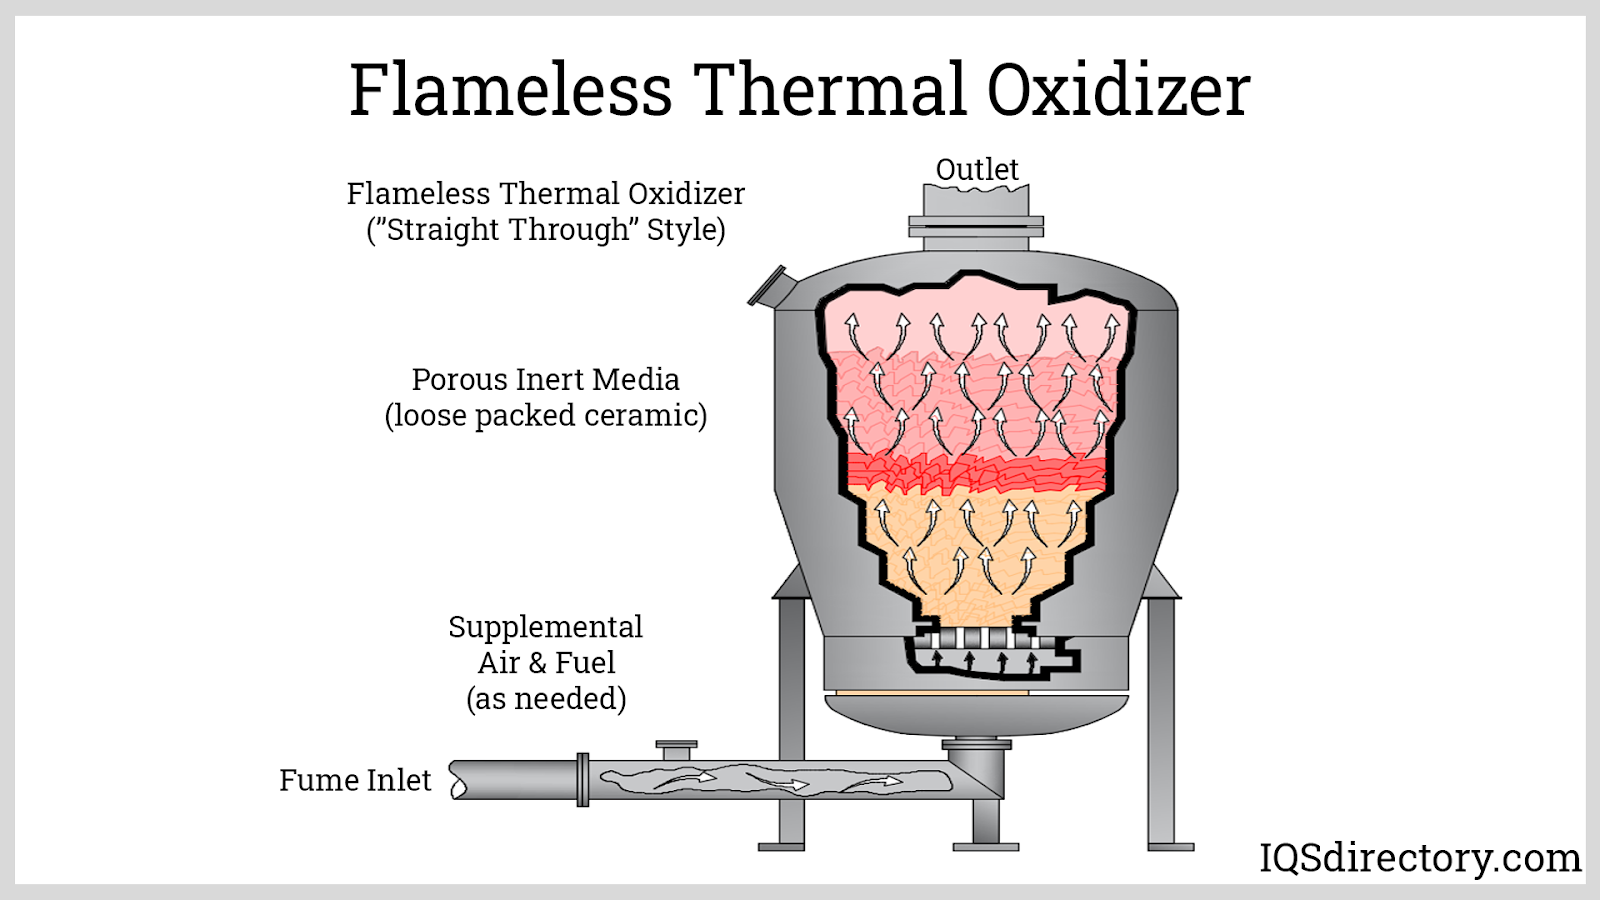 Flameless Thermal Oxidizer